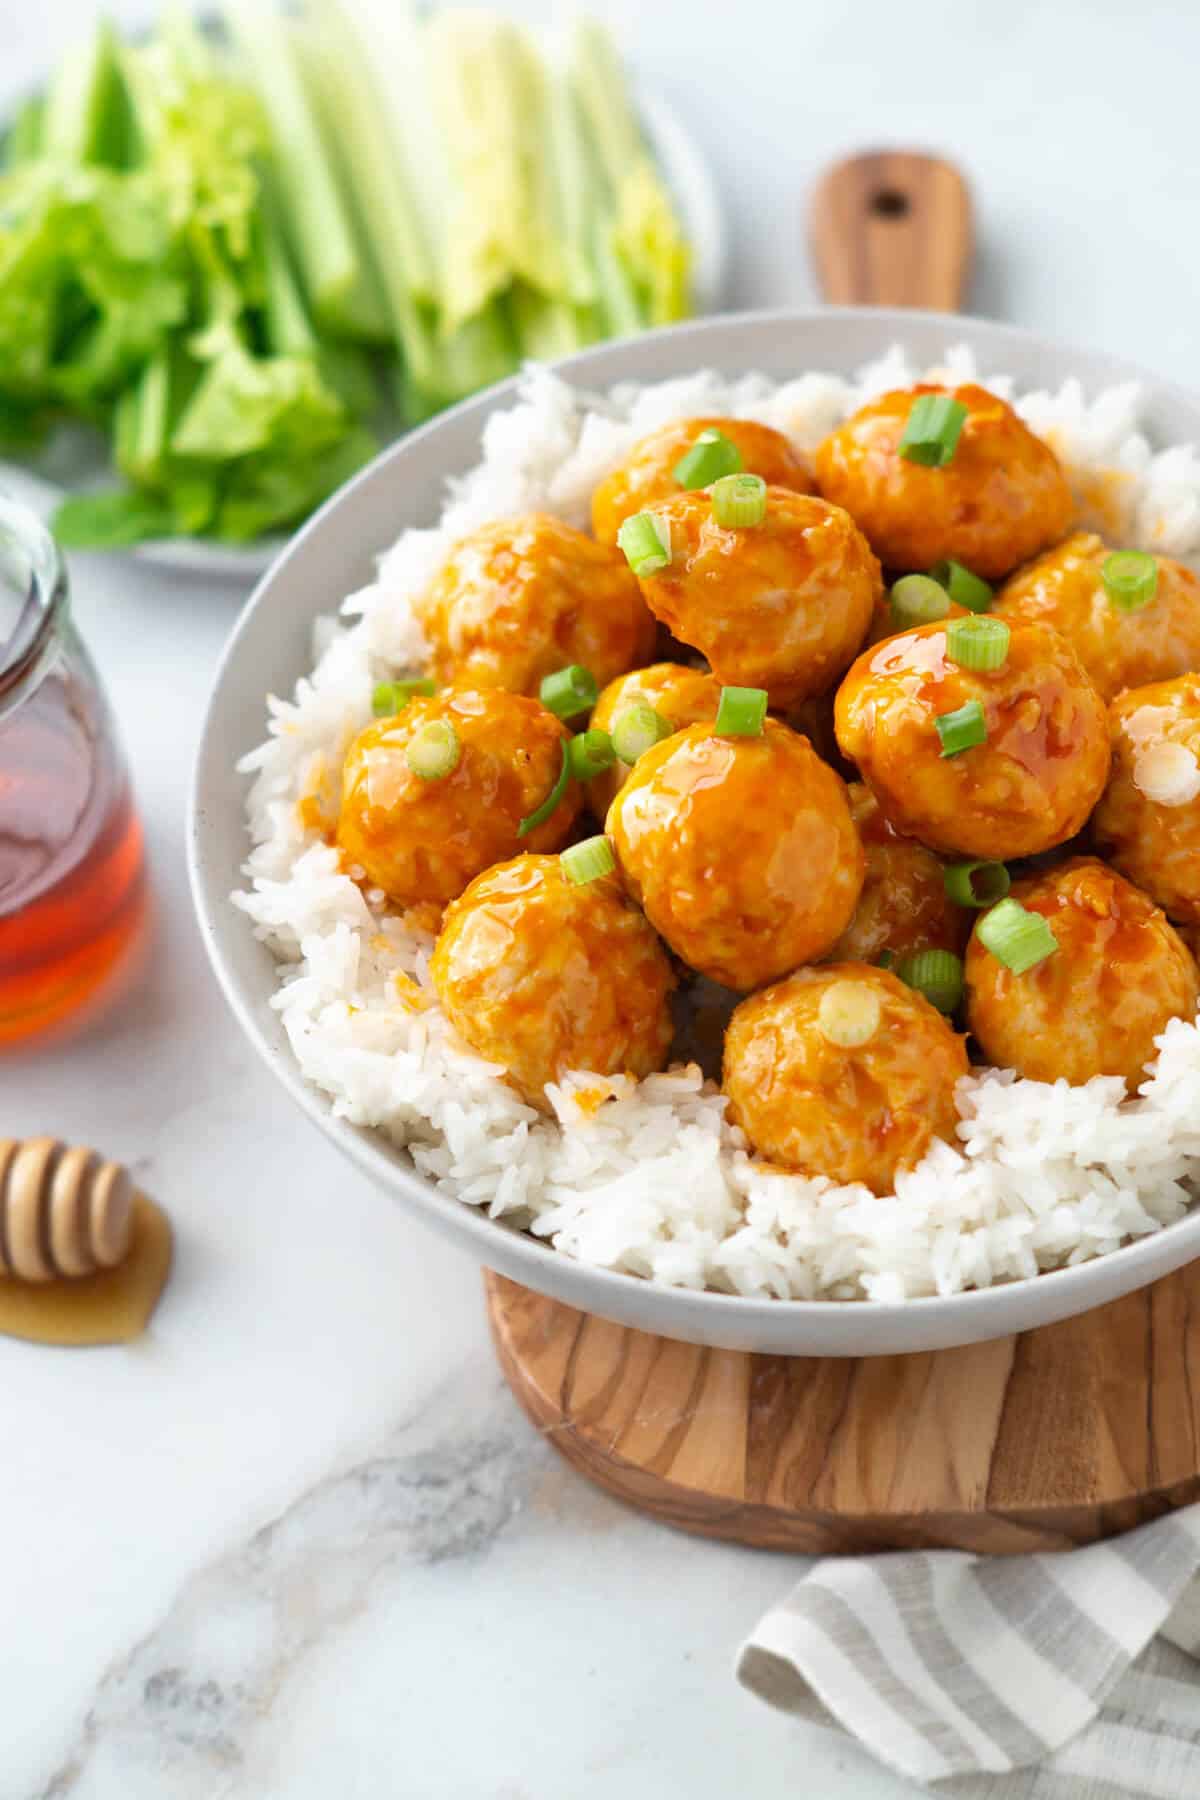 Buffalo turkey meatballs and rice in a bowl.